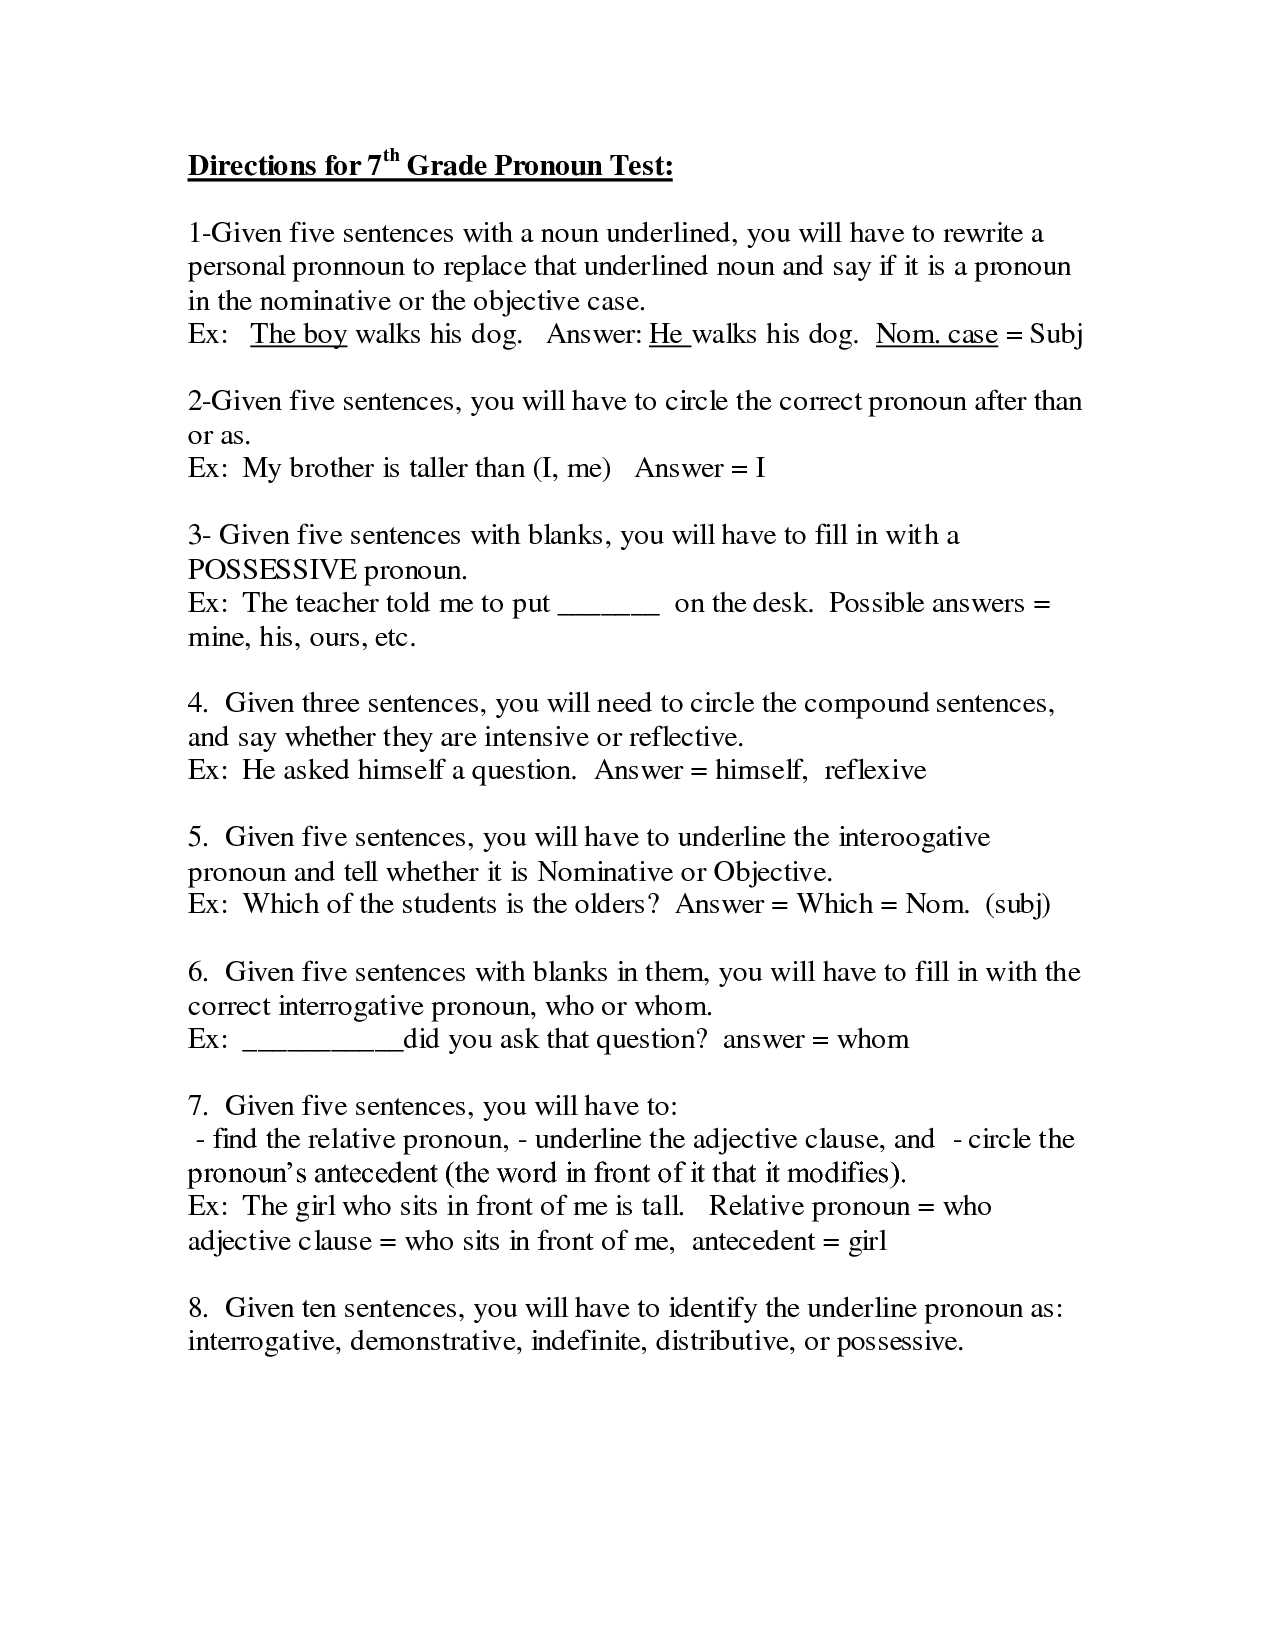 Compound Inequalities Worksheet Answers Along with 7th Grade English Worksheets Printable